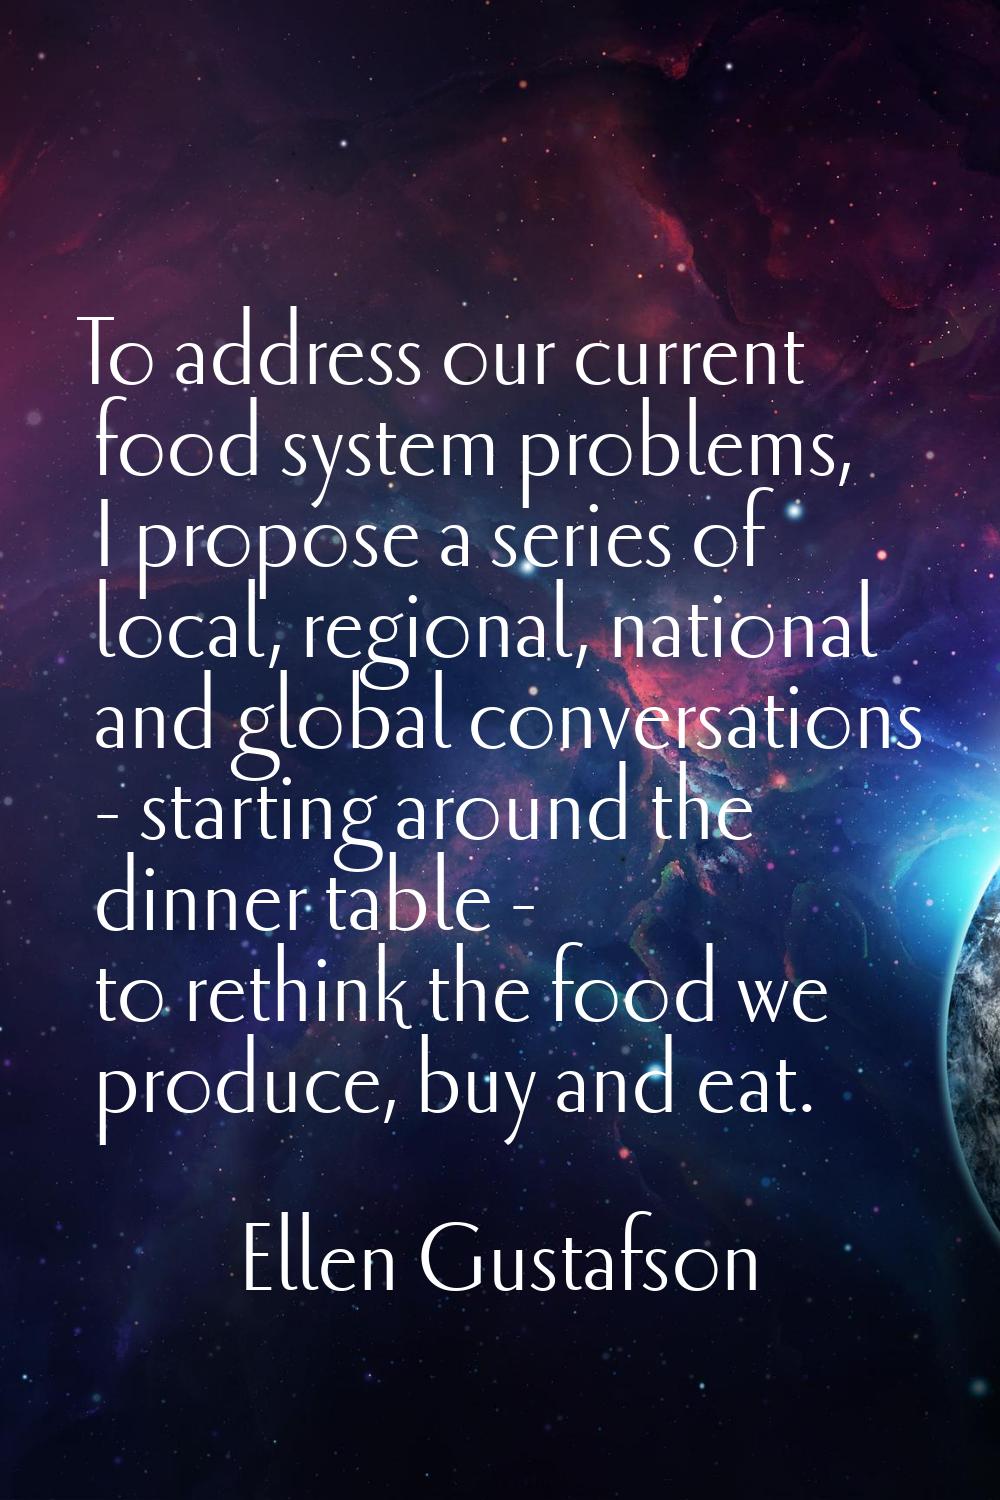 To address our current food system problems, I propose a series of local, regional, national and gl